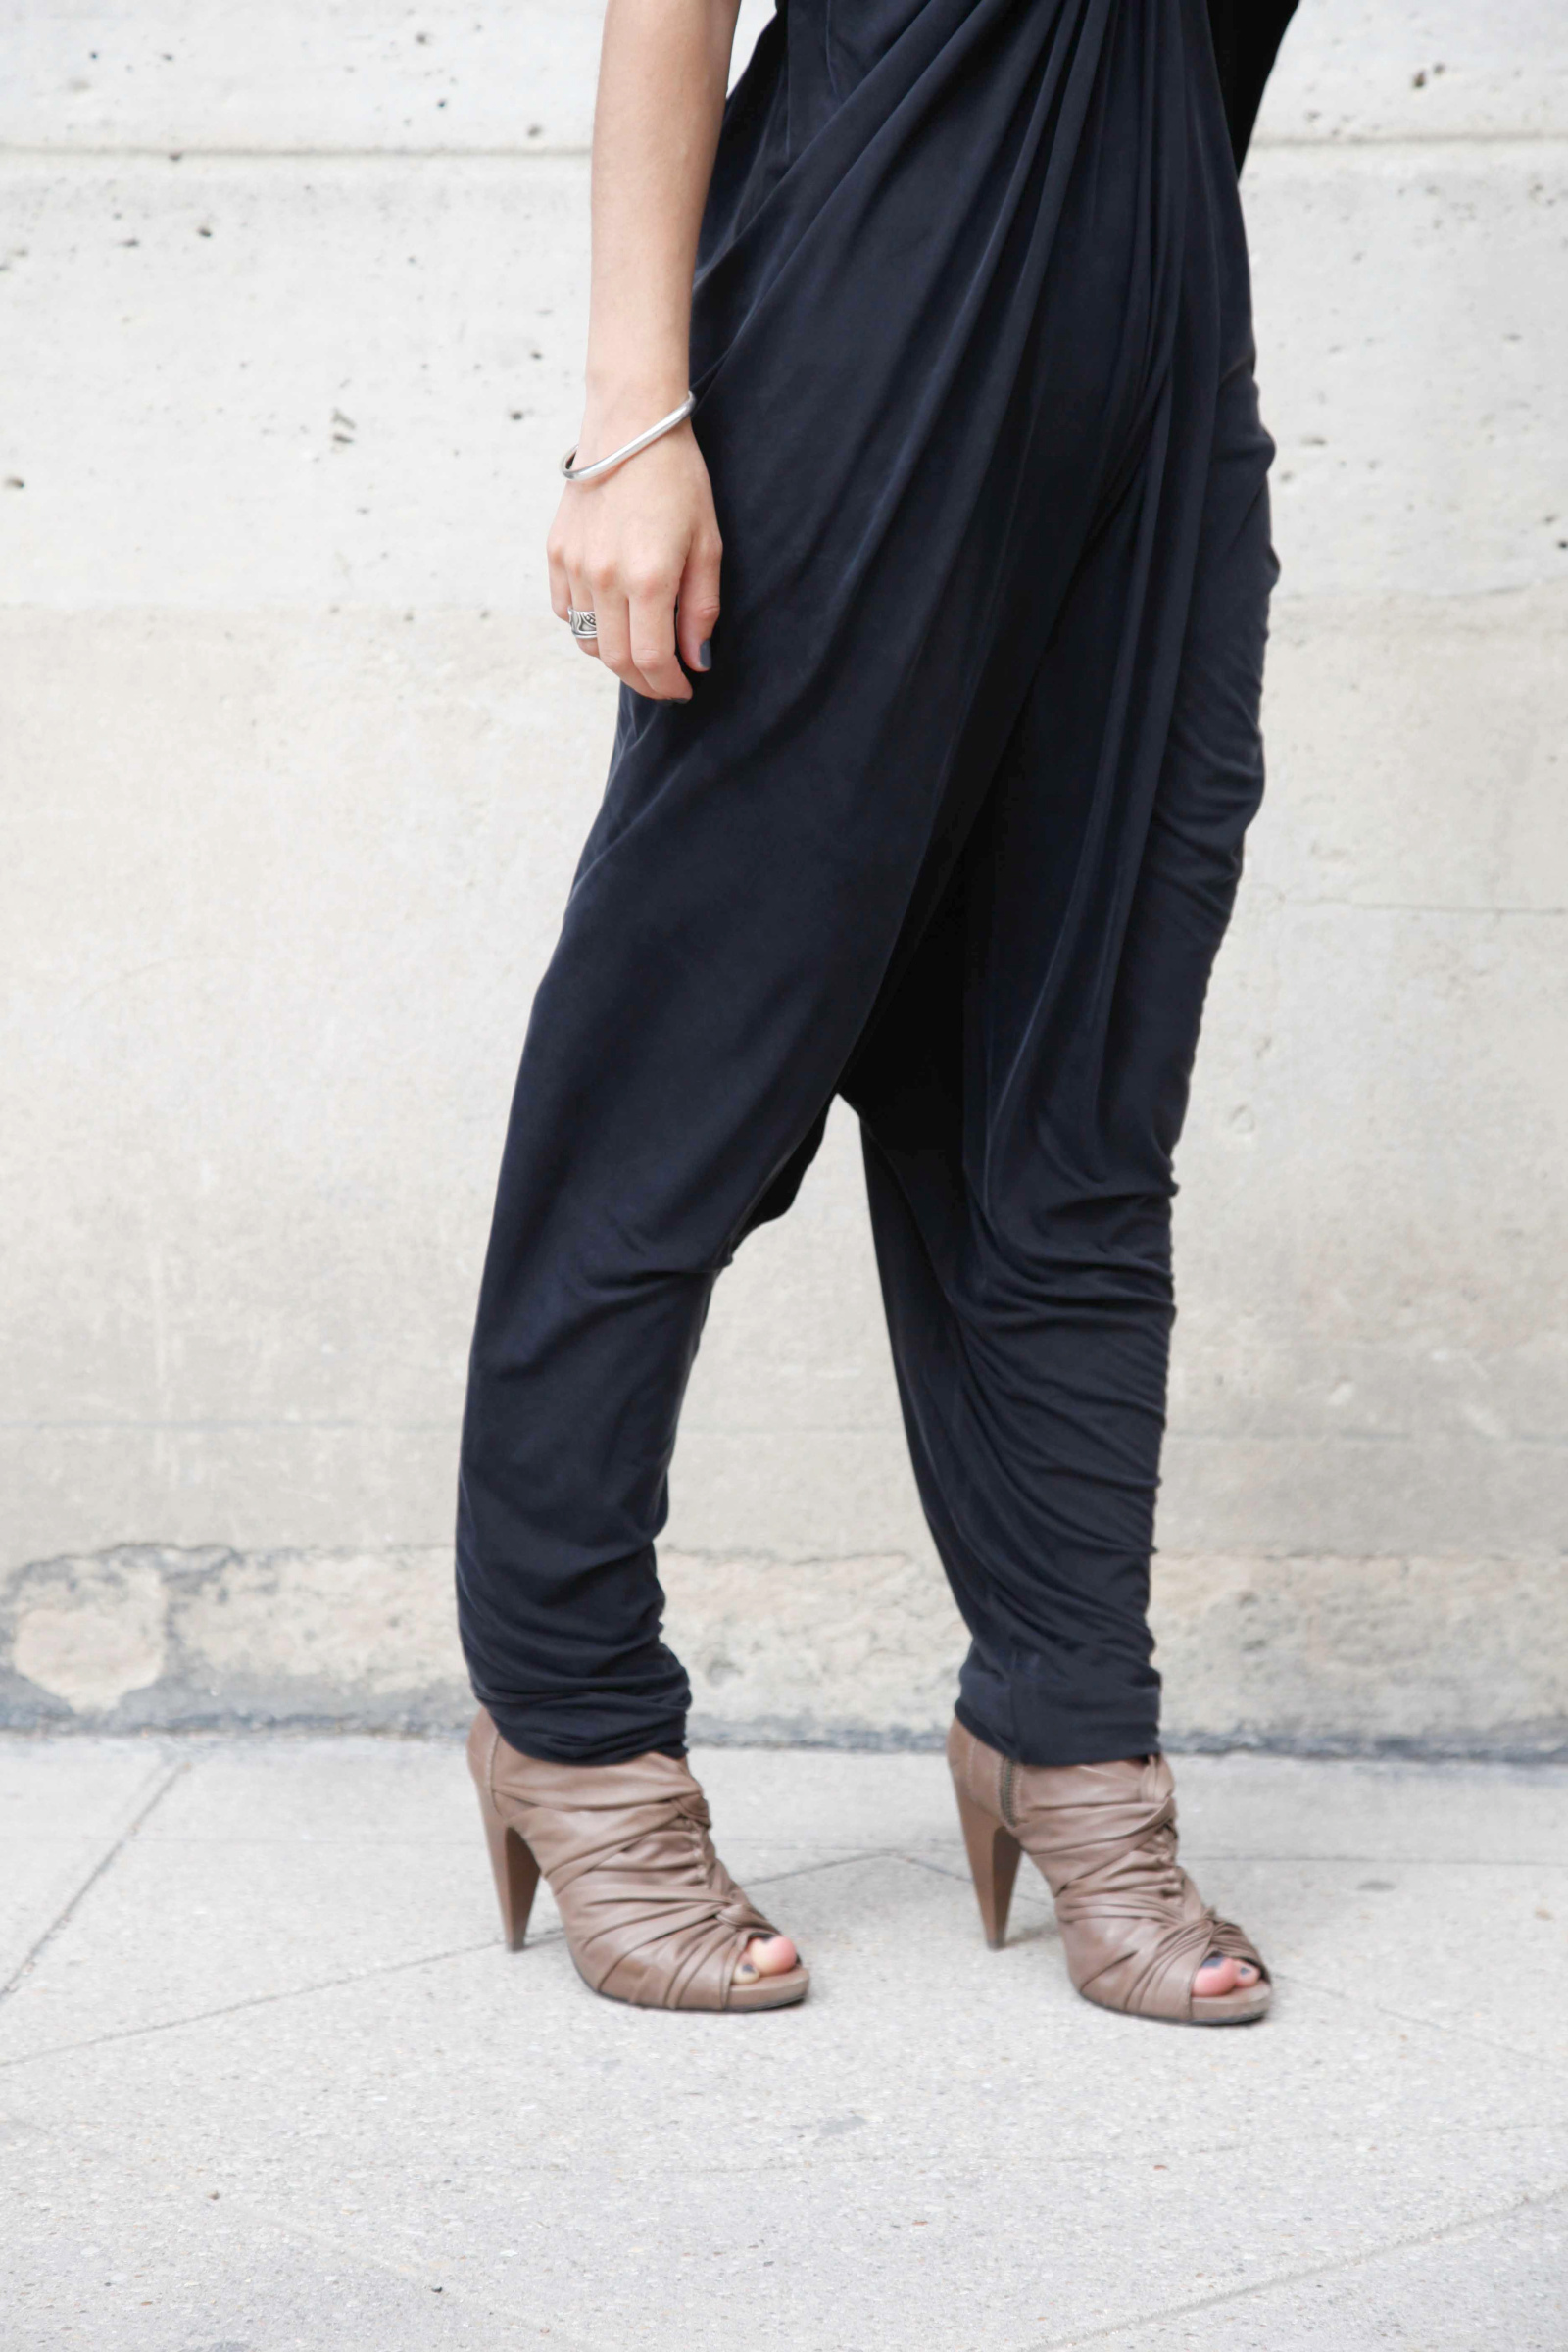 Drop crotch jump suit from All Saints